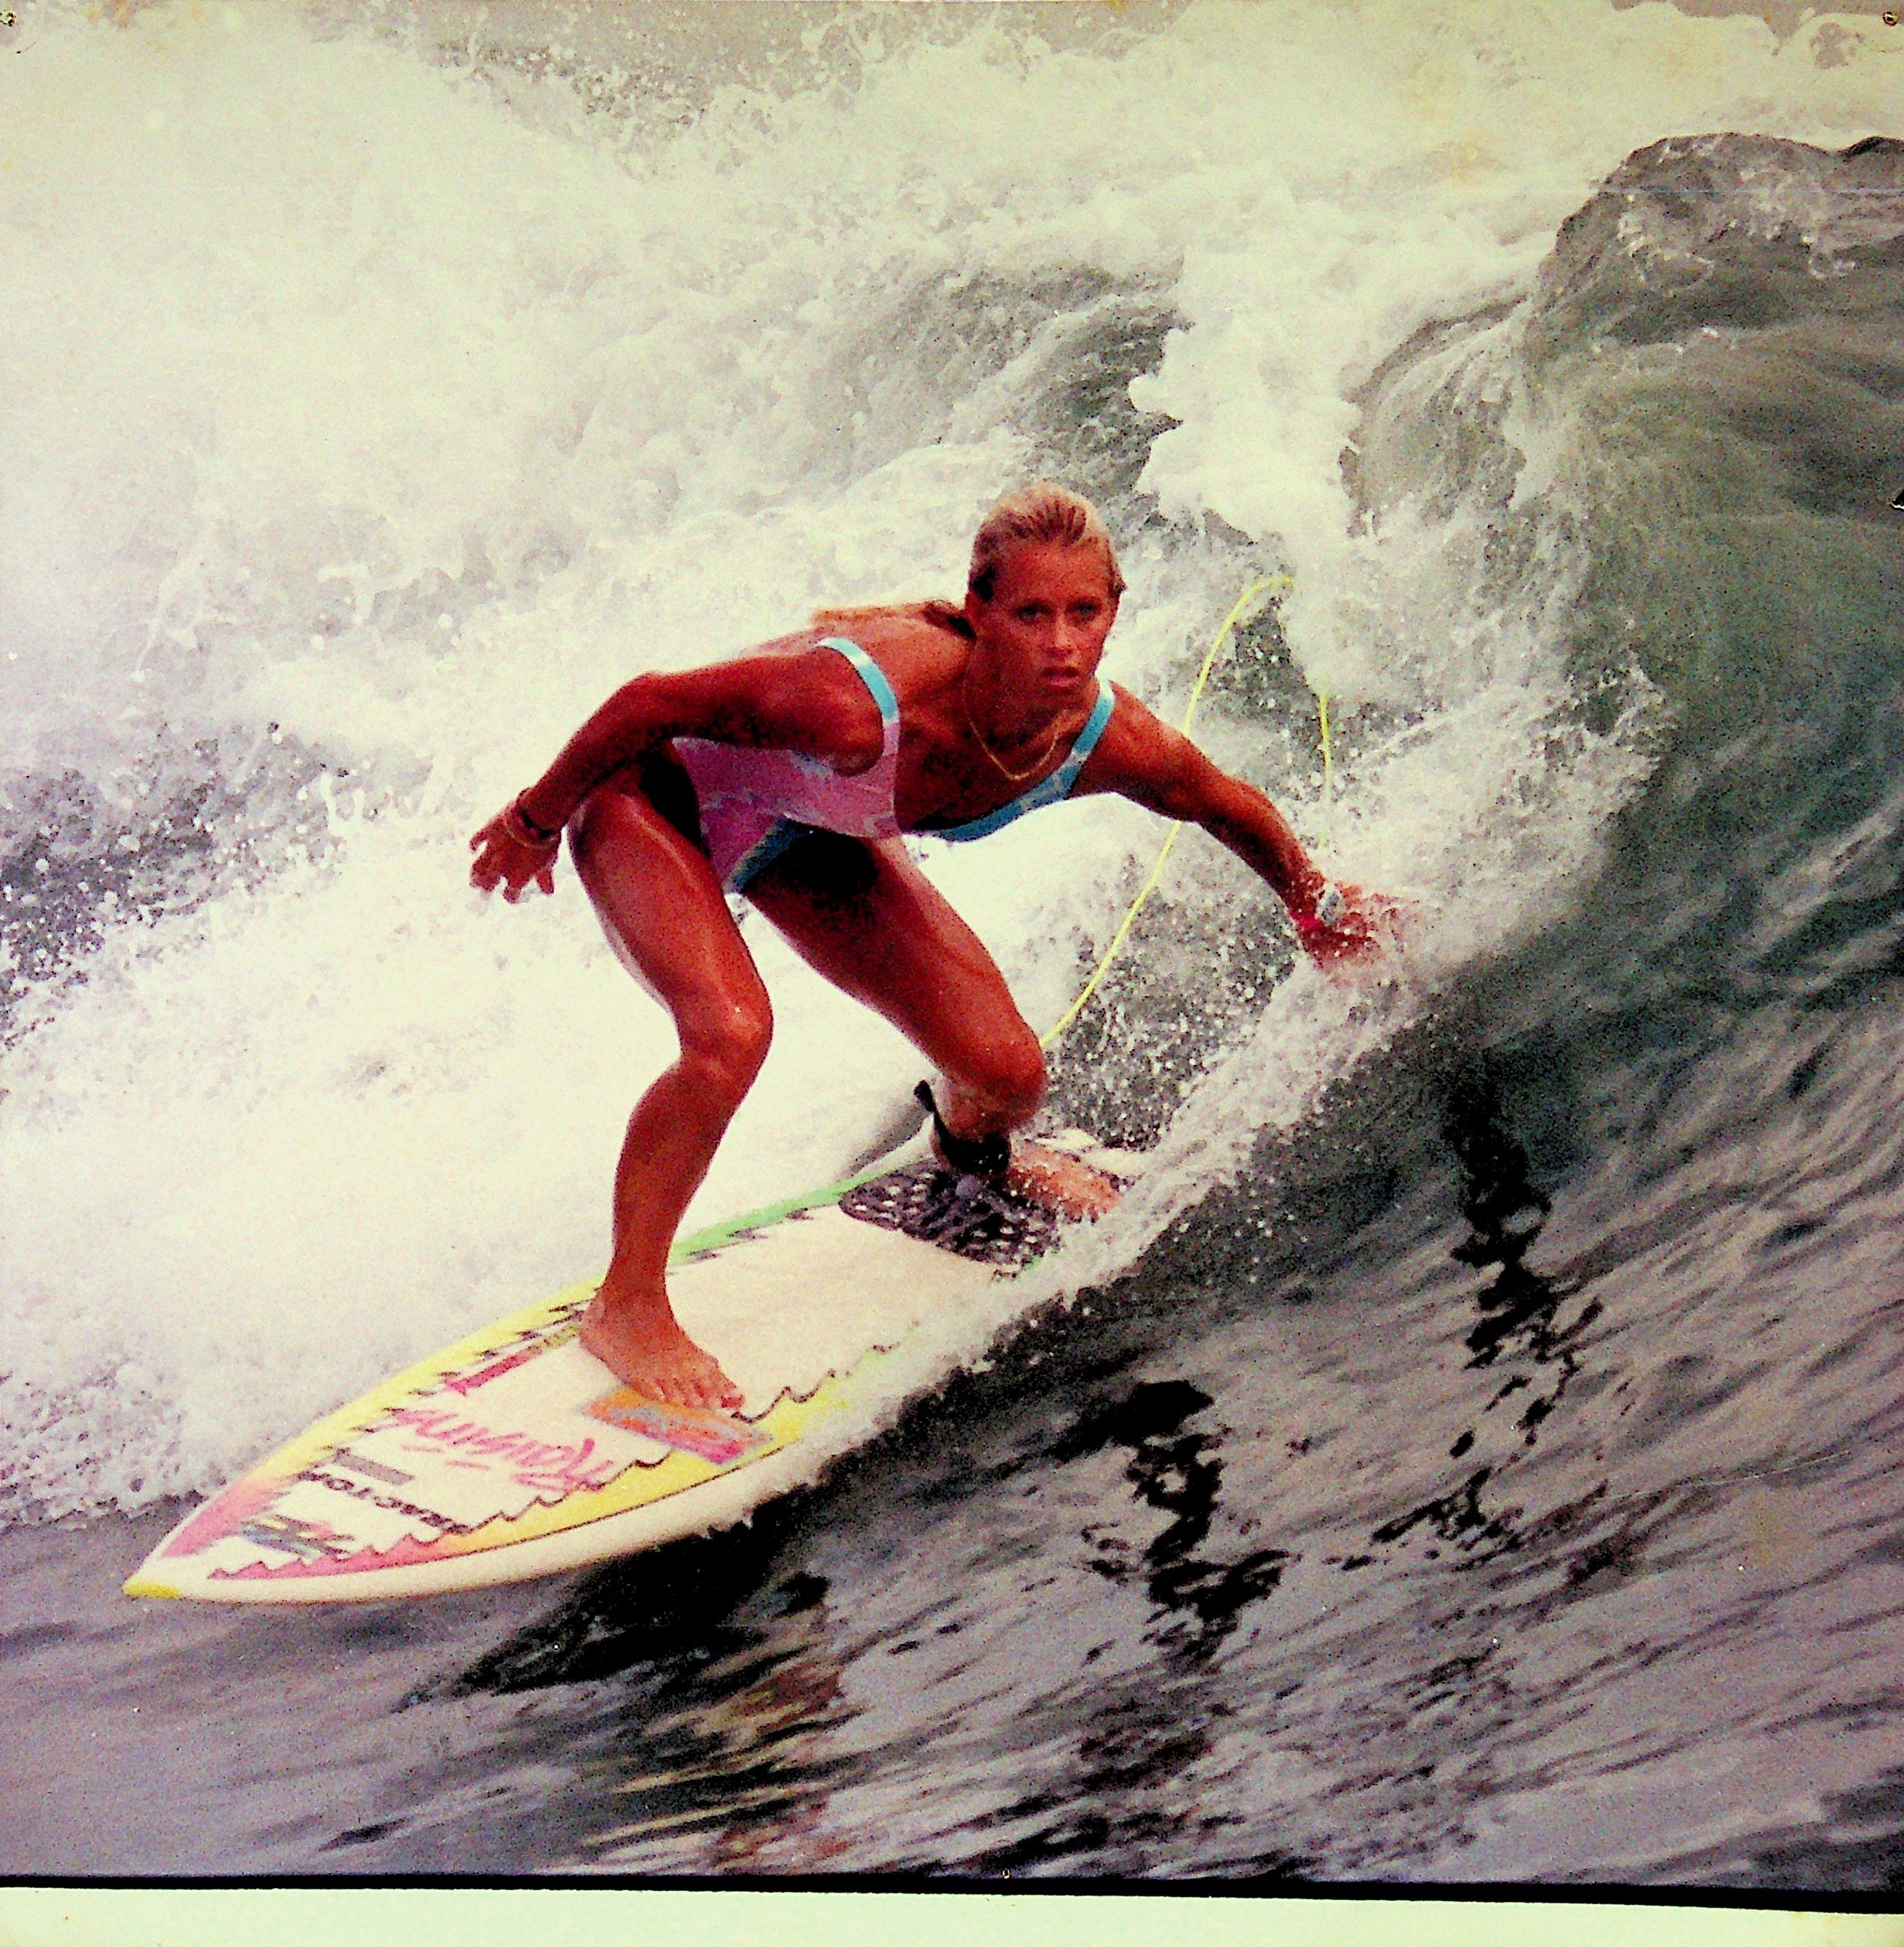 Girls Can't Surf shows how determined women battled sexism in their sport